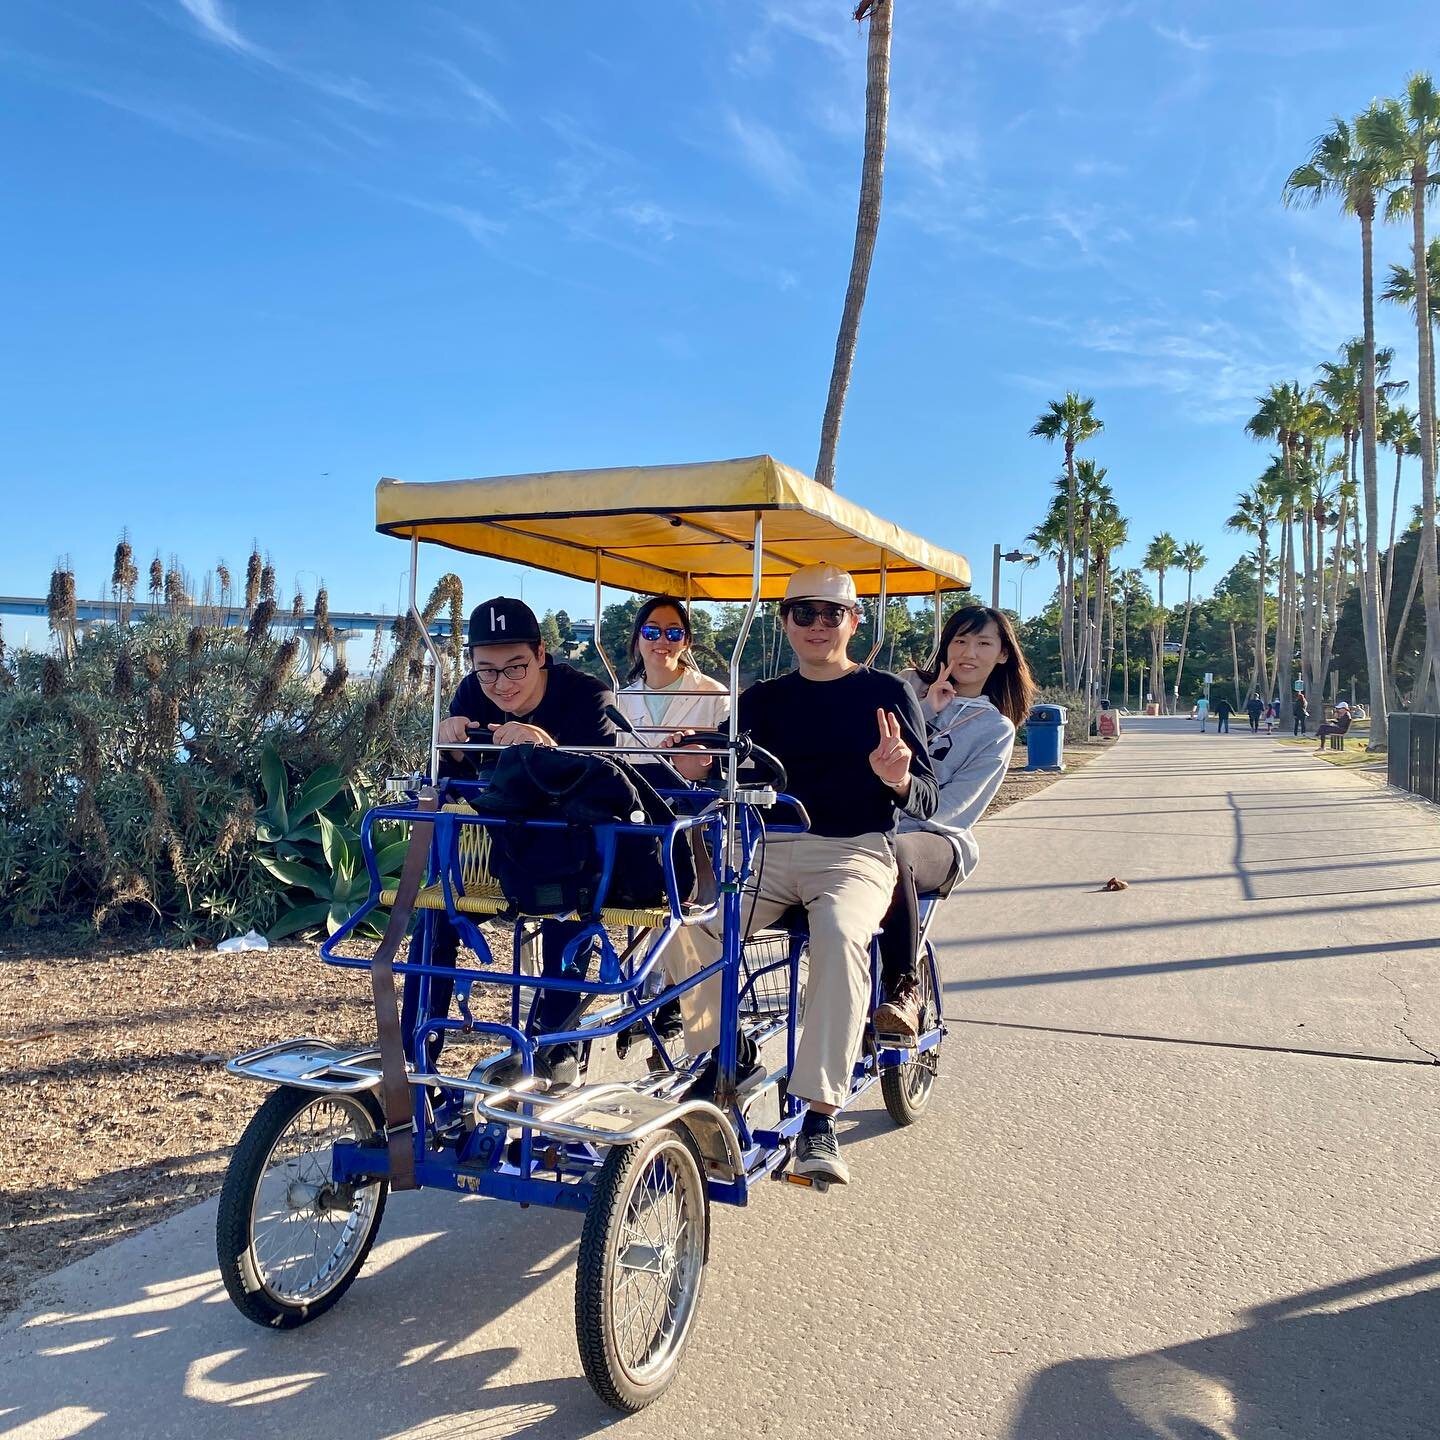 For Veteran&rsquo;s Day, the grad group took a day trip to San Diego where we got to enjoy delicious tacos 🌮 @tacoselgordo_. We then drove to Coronado Island where we got to go biking 🚲🚲 on surreys and then explored and walked around Balboa Park ?